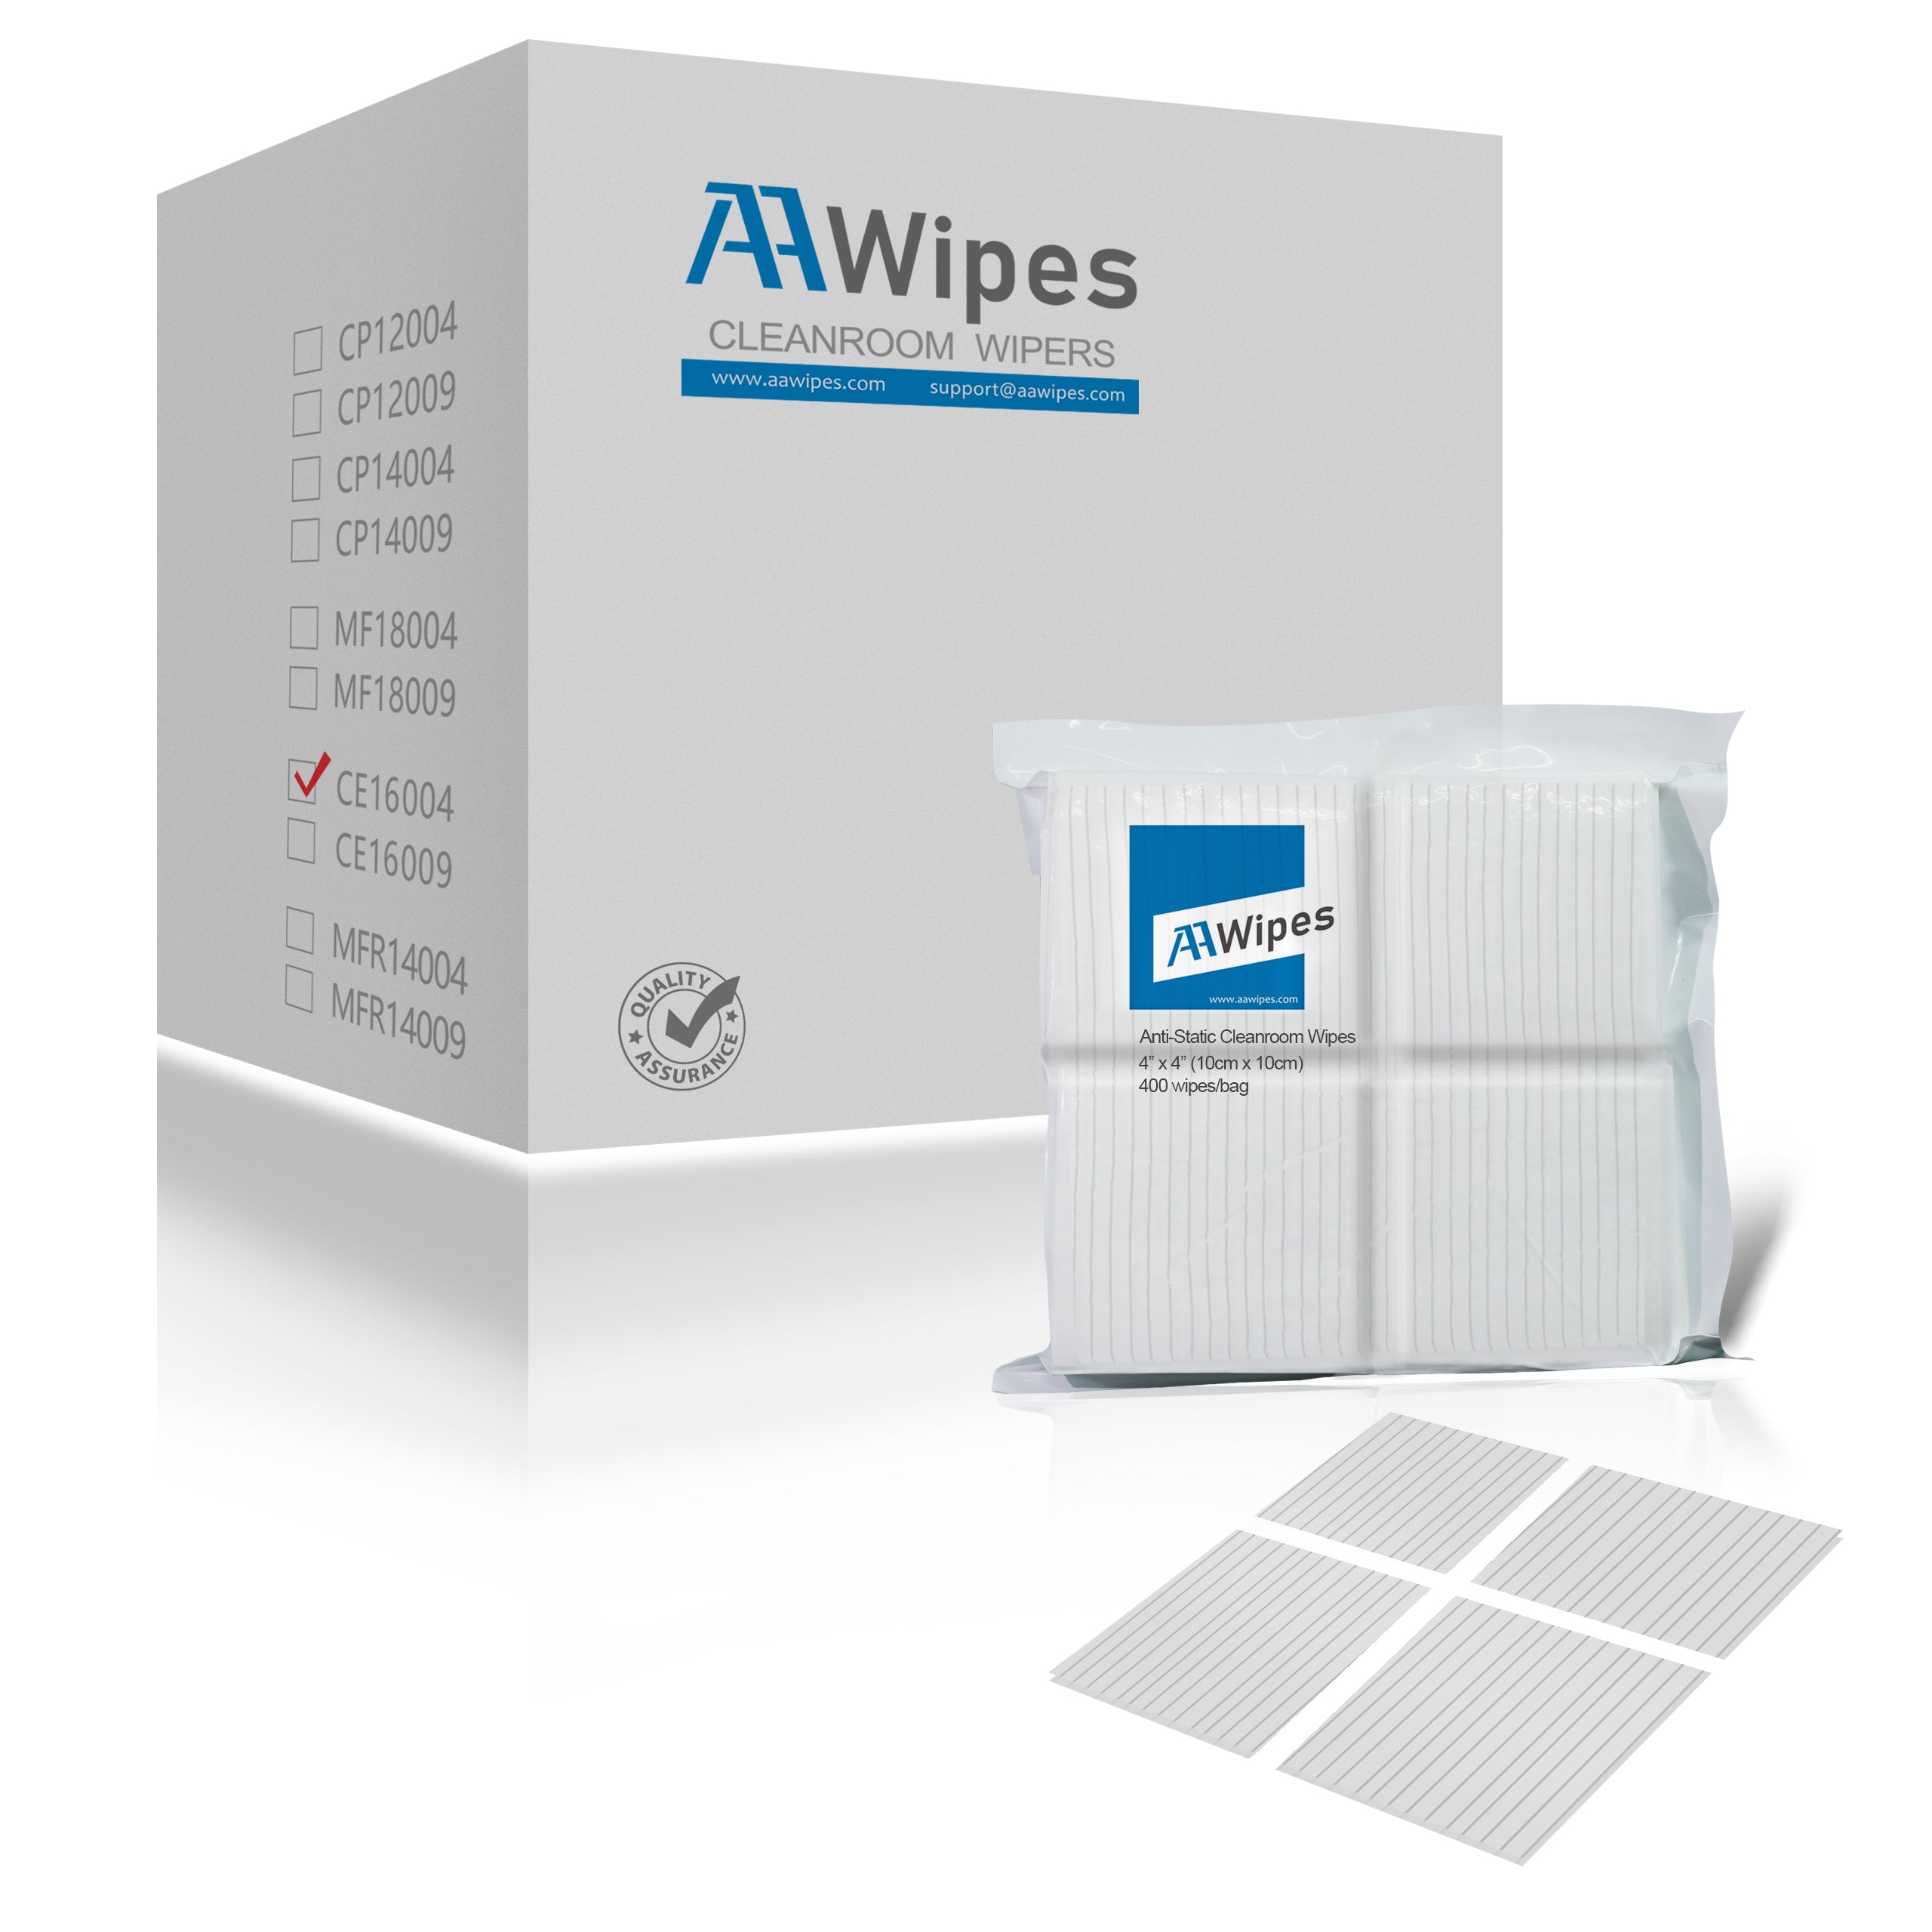 Precision Static-free Sentative Metal Wiper Cleanroom Anti-Static ESD Wipes Polyester-Carbon Yarn 4"x4" (1 Box with 4,000 Wipes per 10 Bags) (No. ESDC-0404-400-SM)